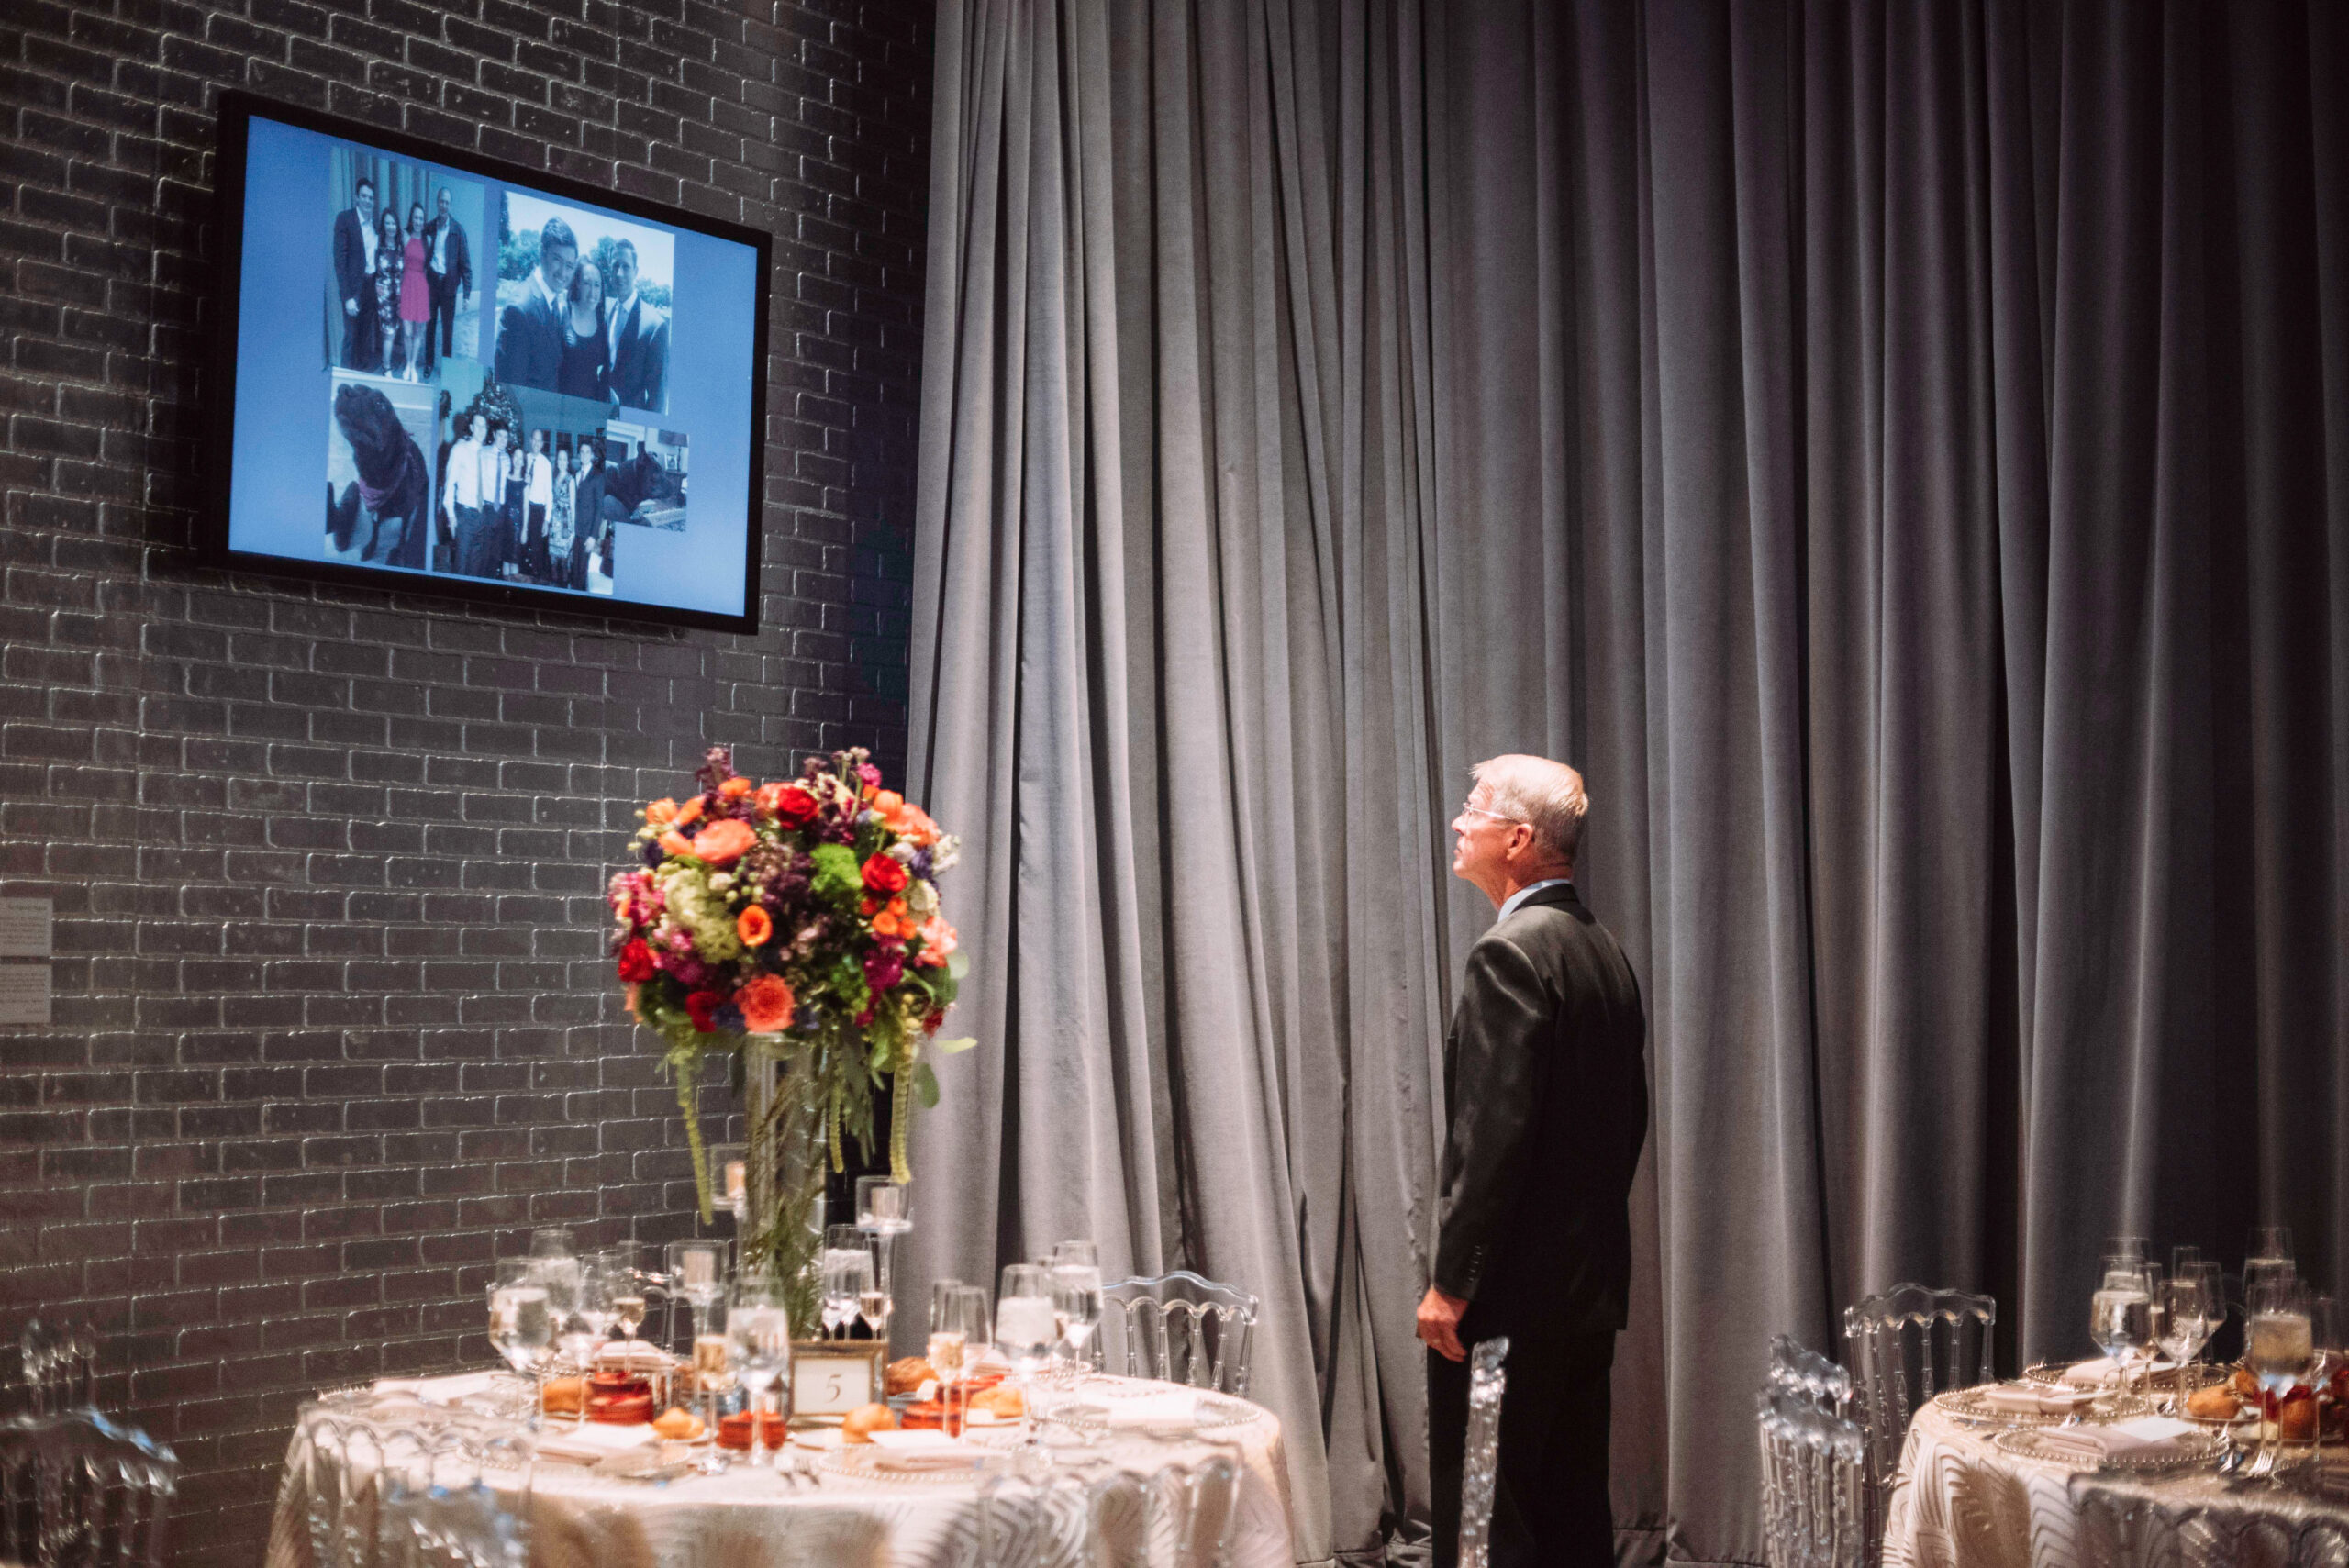 Man in a suit looks up at screen with photographs on it. In the foreground is a table with white linen, clear plastic chairs, and a flower centerpiece. Gray curtains and a silver chair are in the background.